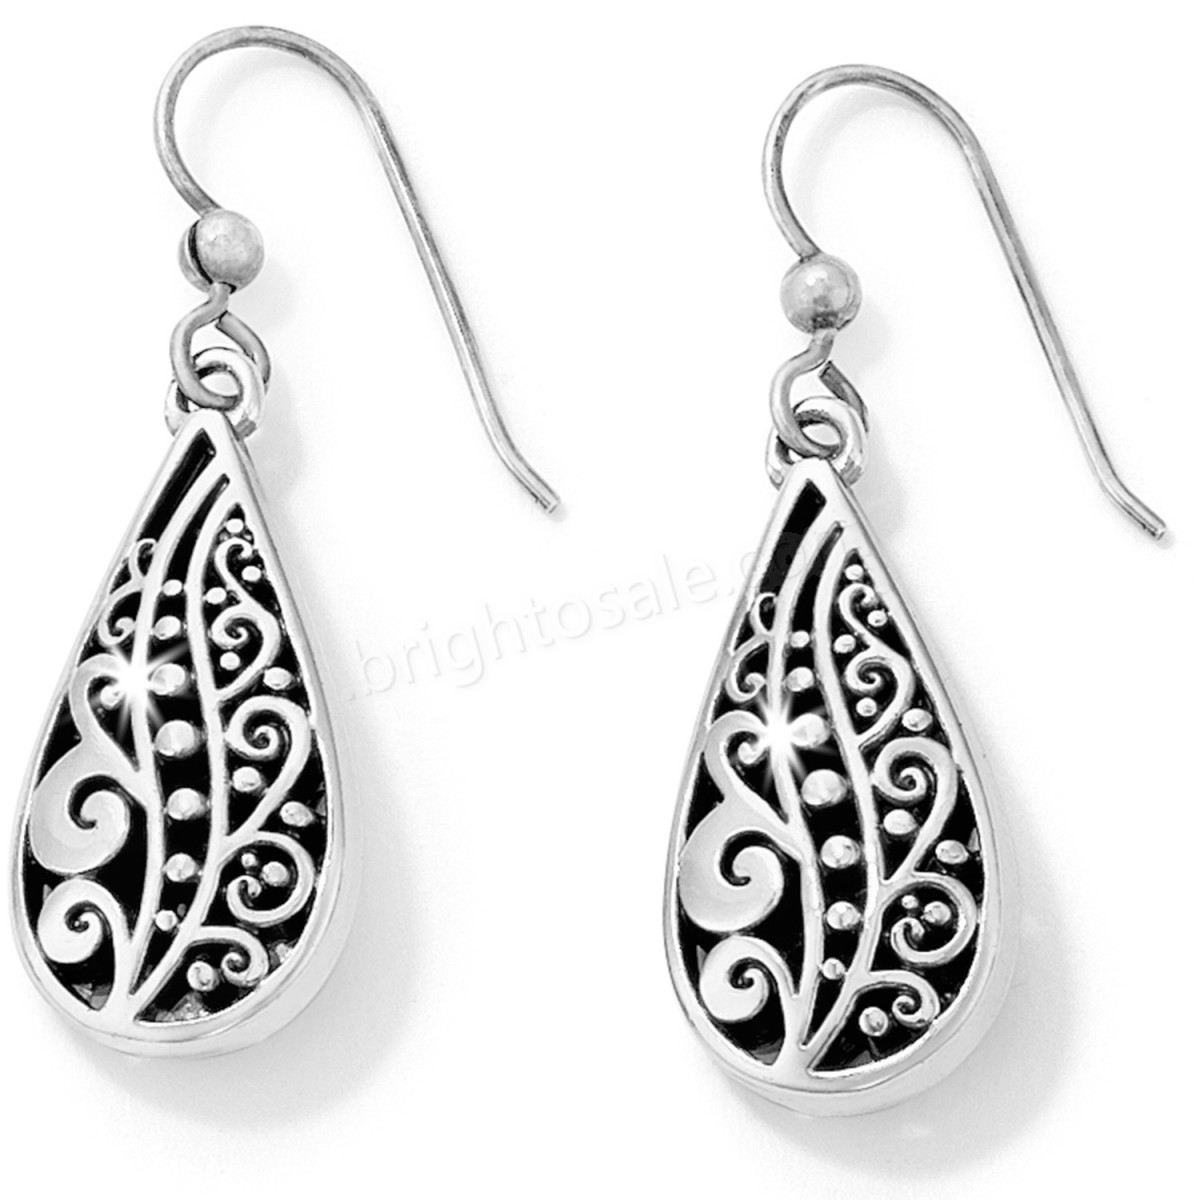 Brighton Collectibles & Online Discount Love Affair French Wire Earrings - -0